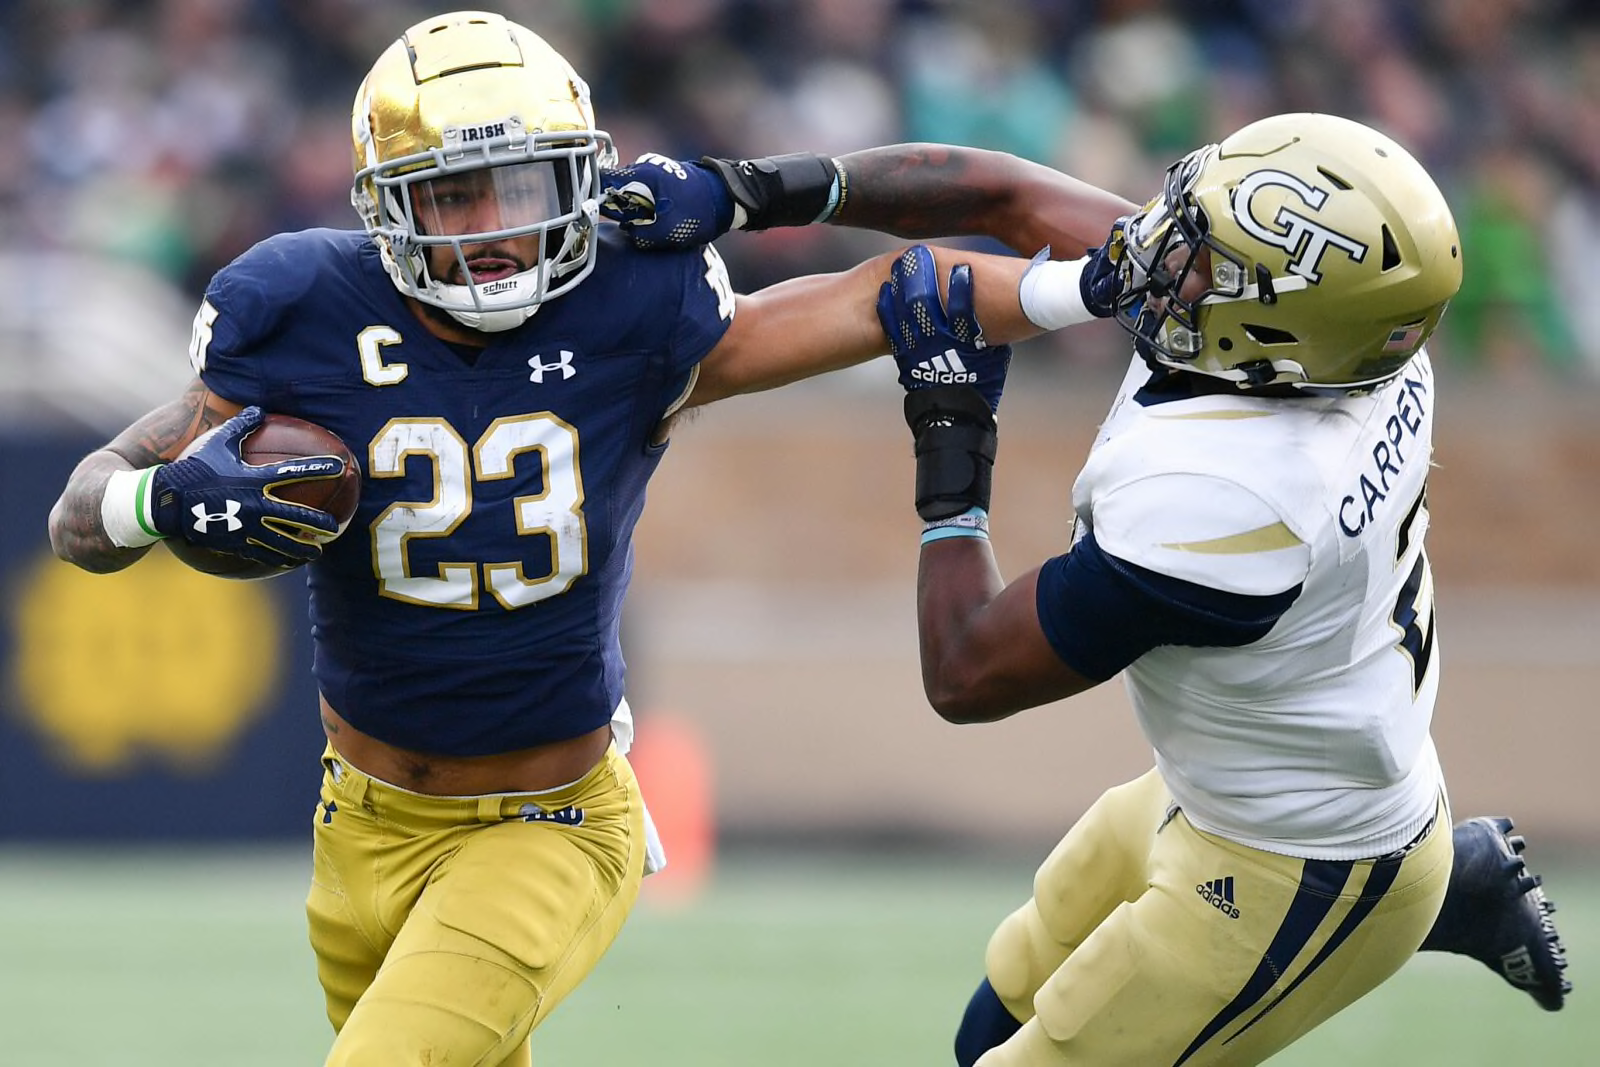 Notre Dame football: Reasons Kyren Williams should be RB1 in 2022 Draft